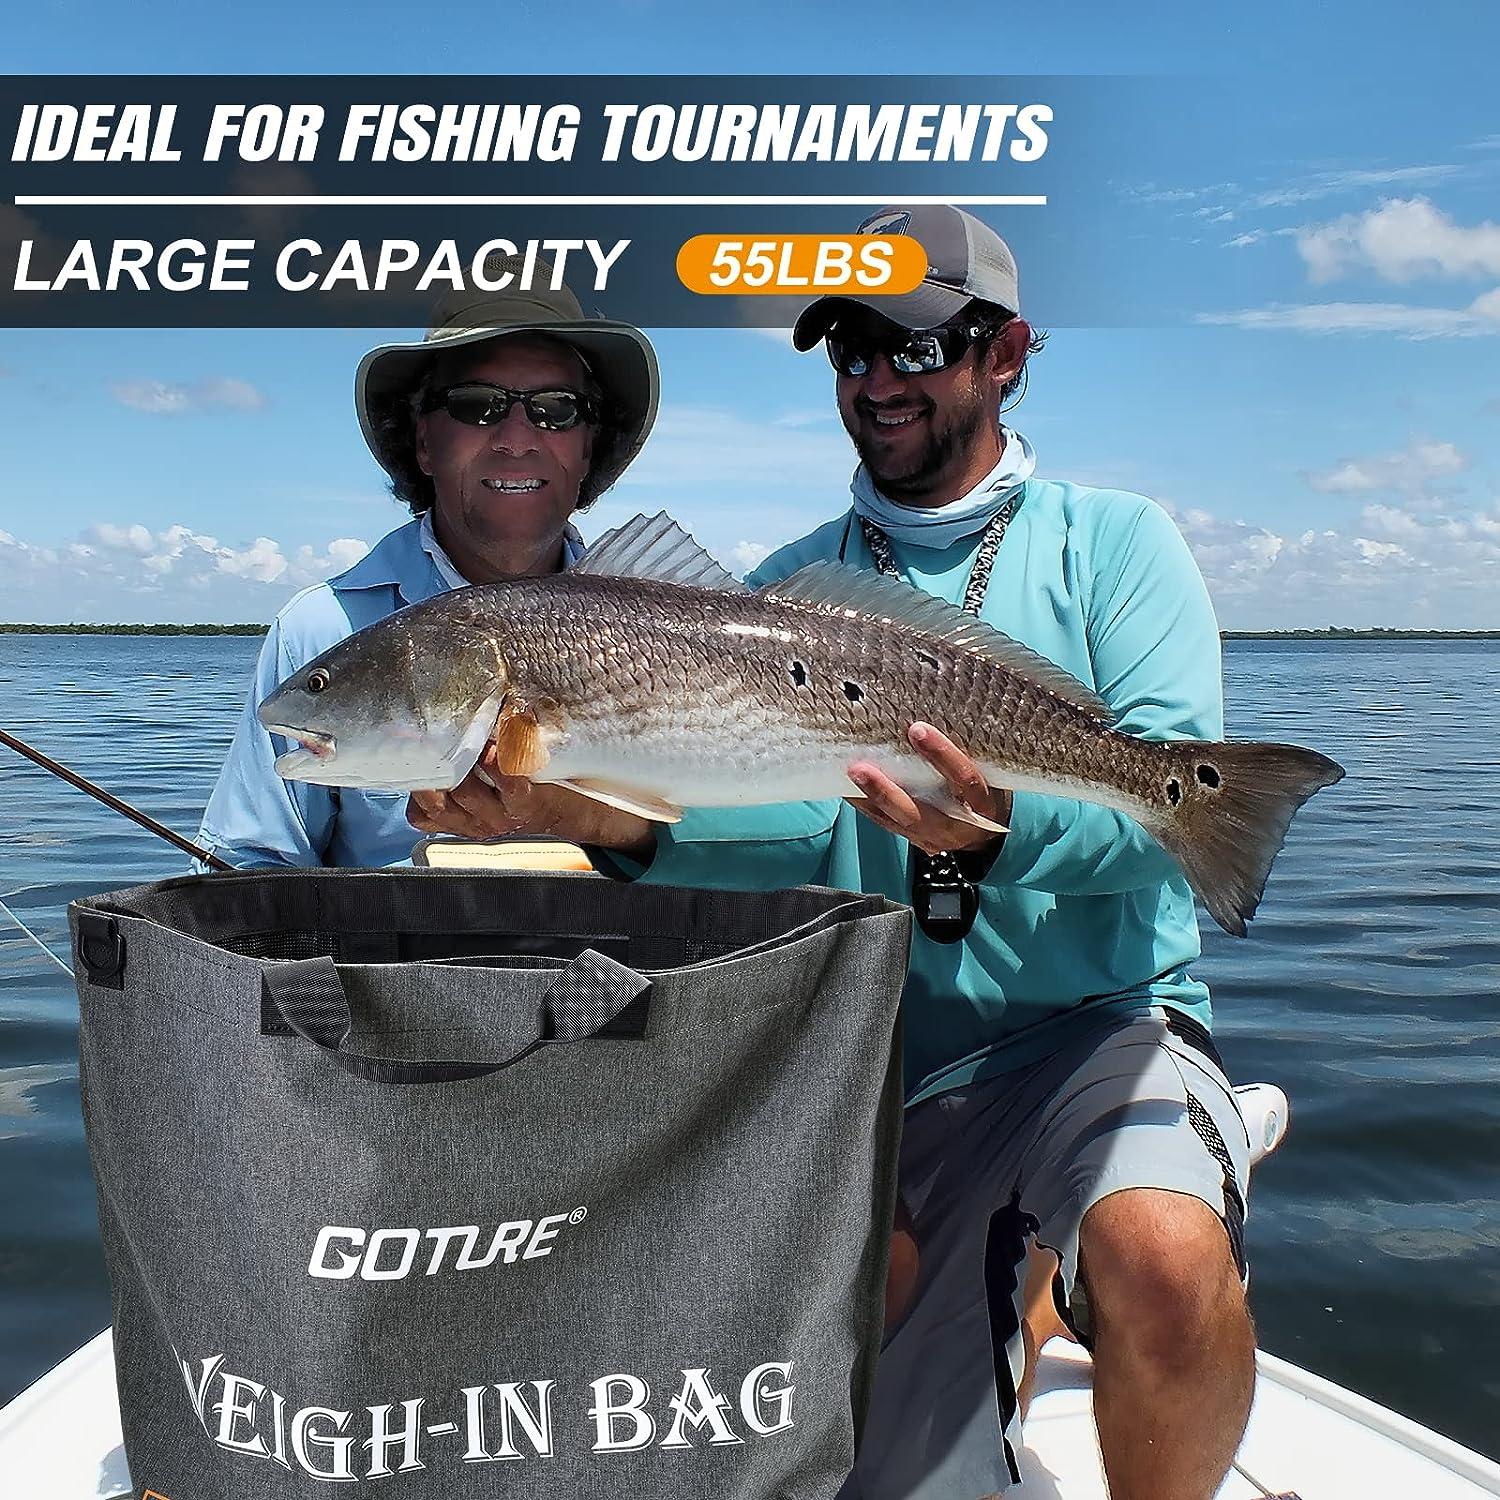 Goture Tournament Fishing Bag,Bass Weigh in Bag with Built-in 18inch Fish  Ruler 2 in 1 Kit, Removable Inner Mesh Tournament Fish Bags,25.6x22inch  Heavy Duty Weigh In Bag for Bass Fishing C:Fishing Weigh-in